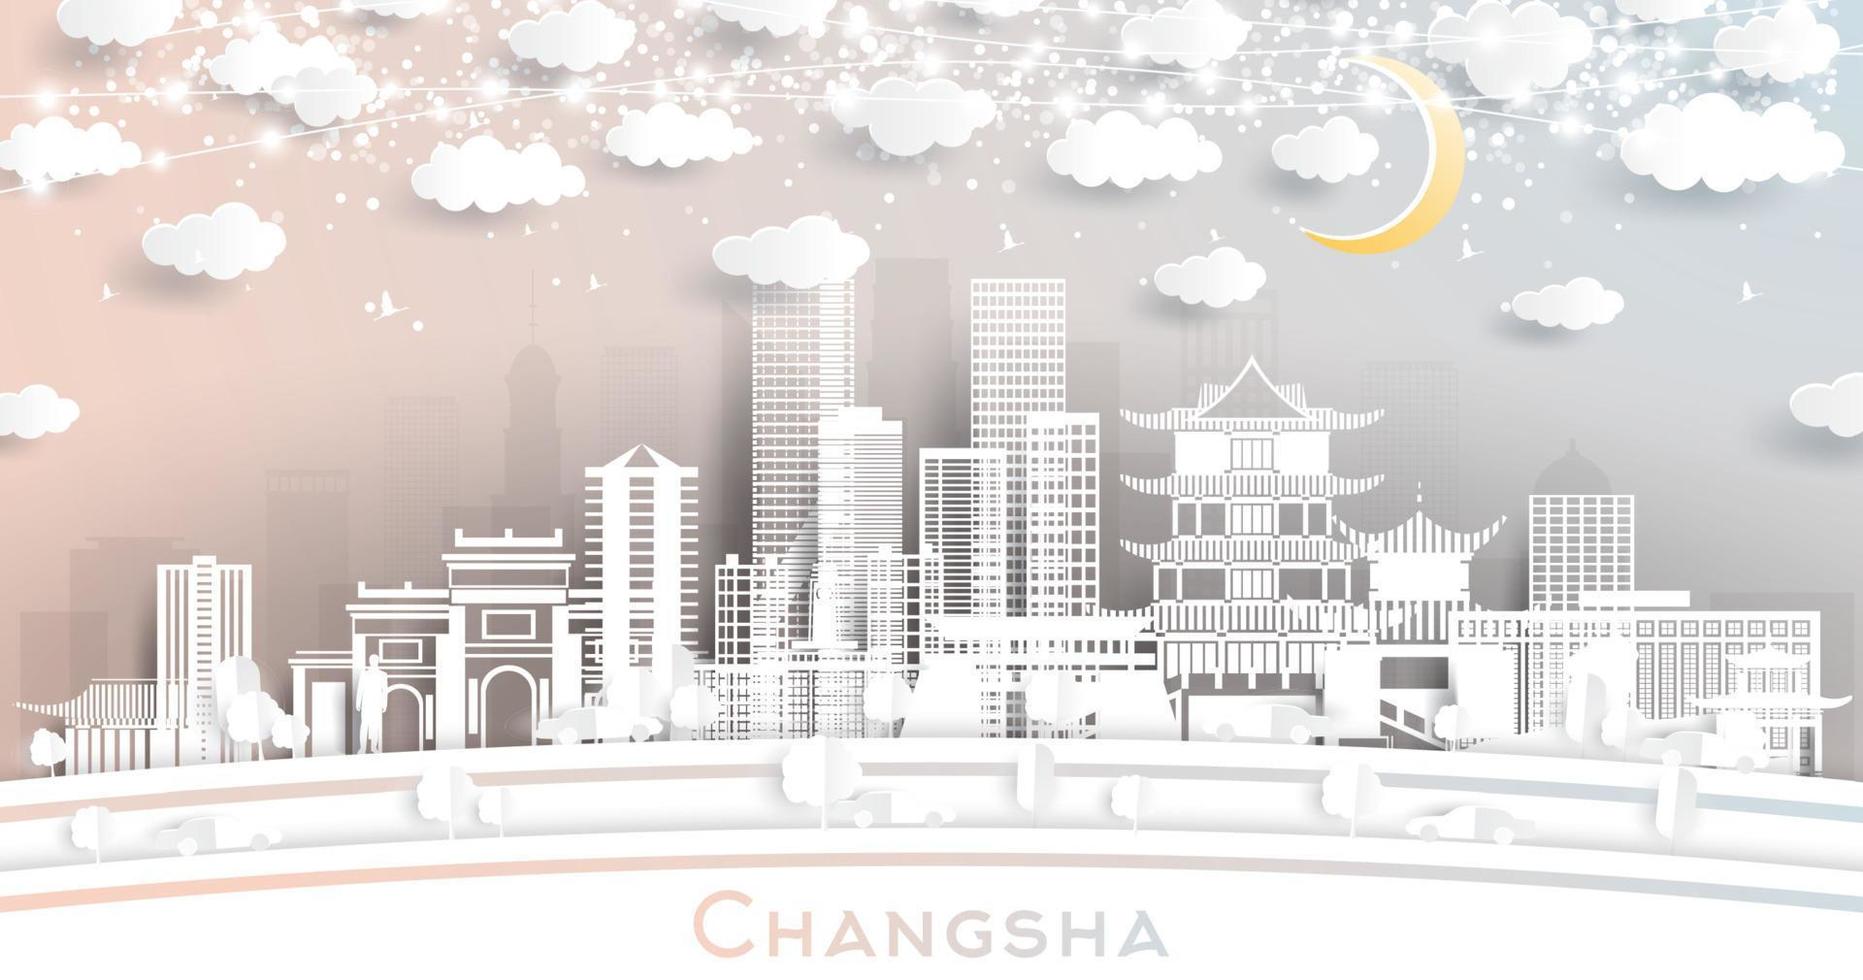 Changsha China City Skyline in Paper Cut Style with White Buildings, Moon and Neon Garland. vector